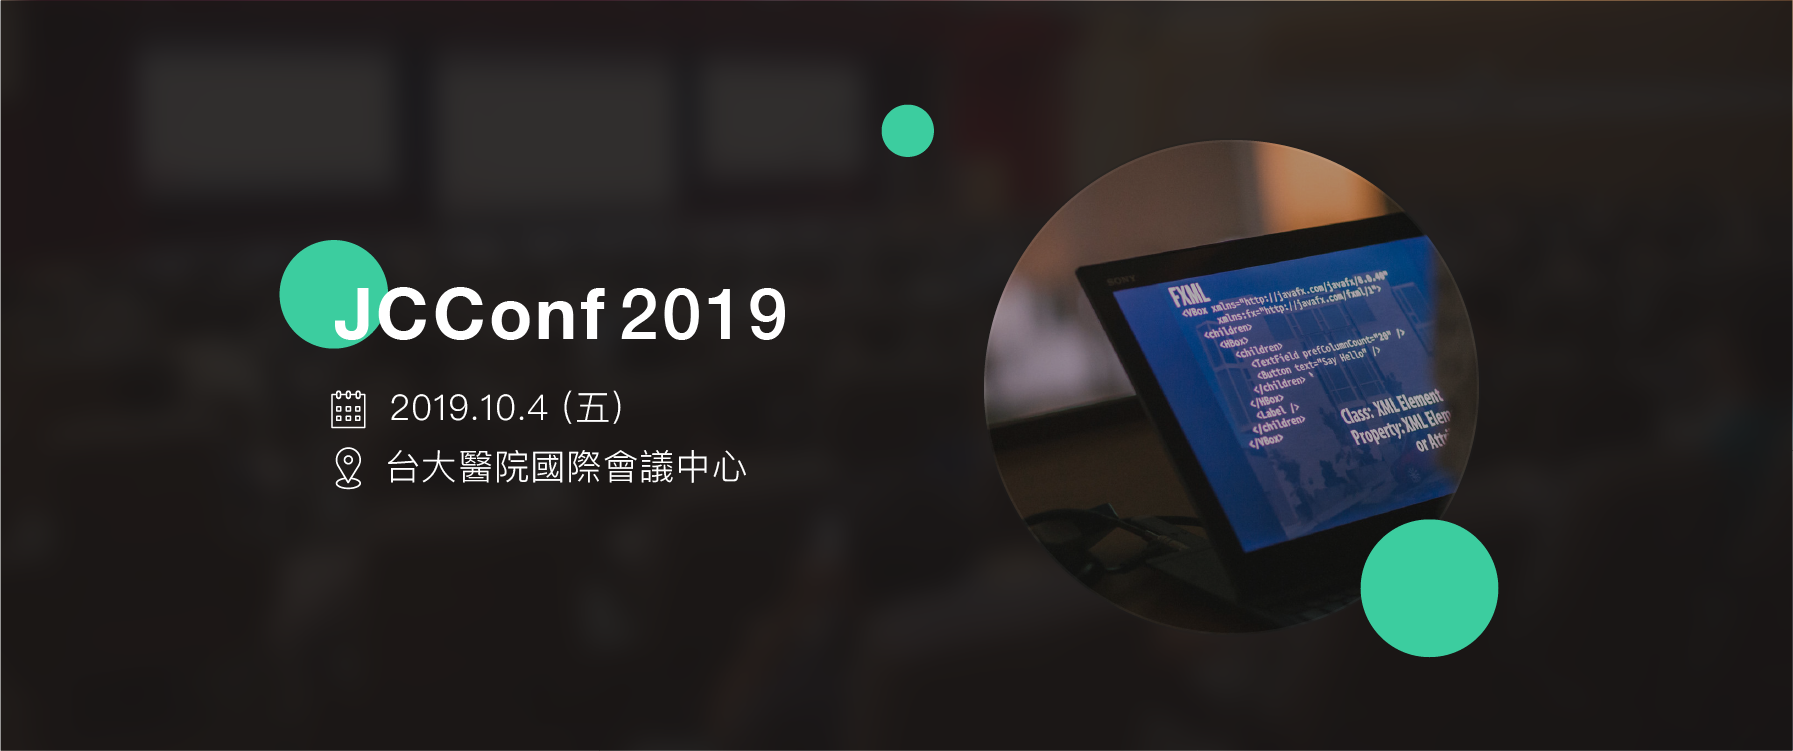 header image for Java Community Conference Taiwan